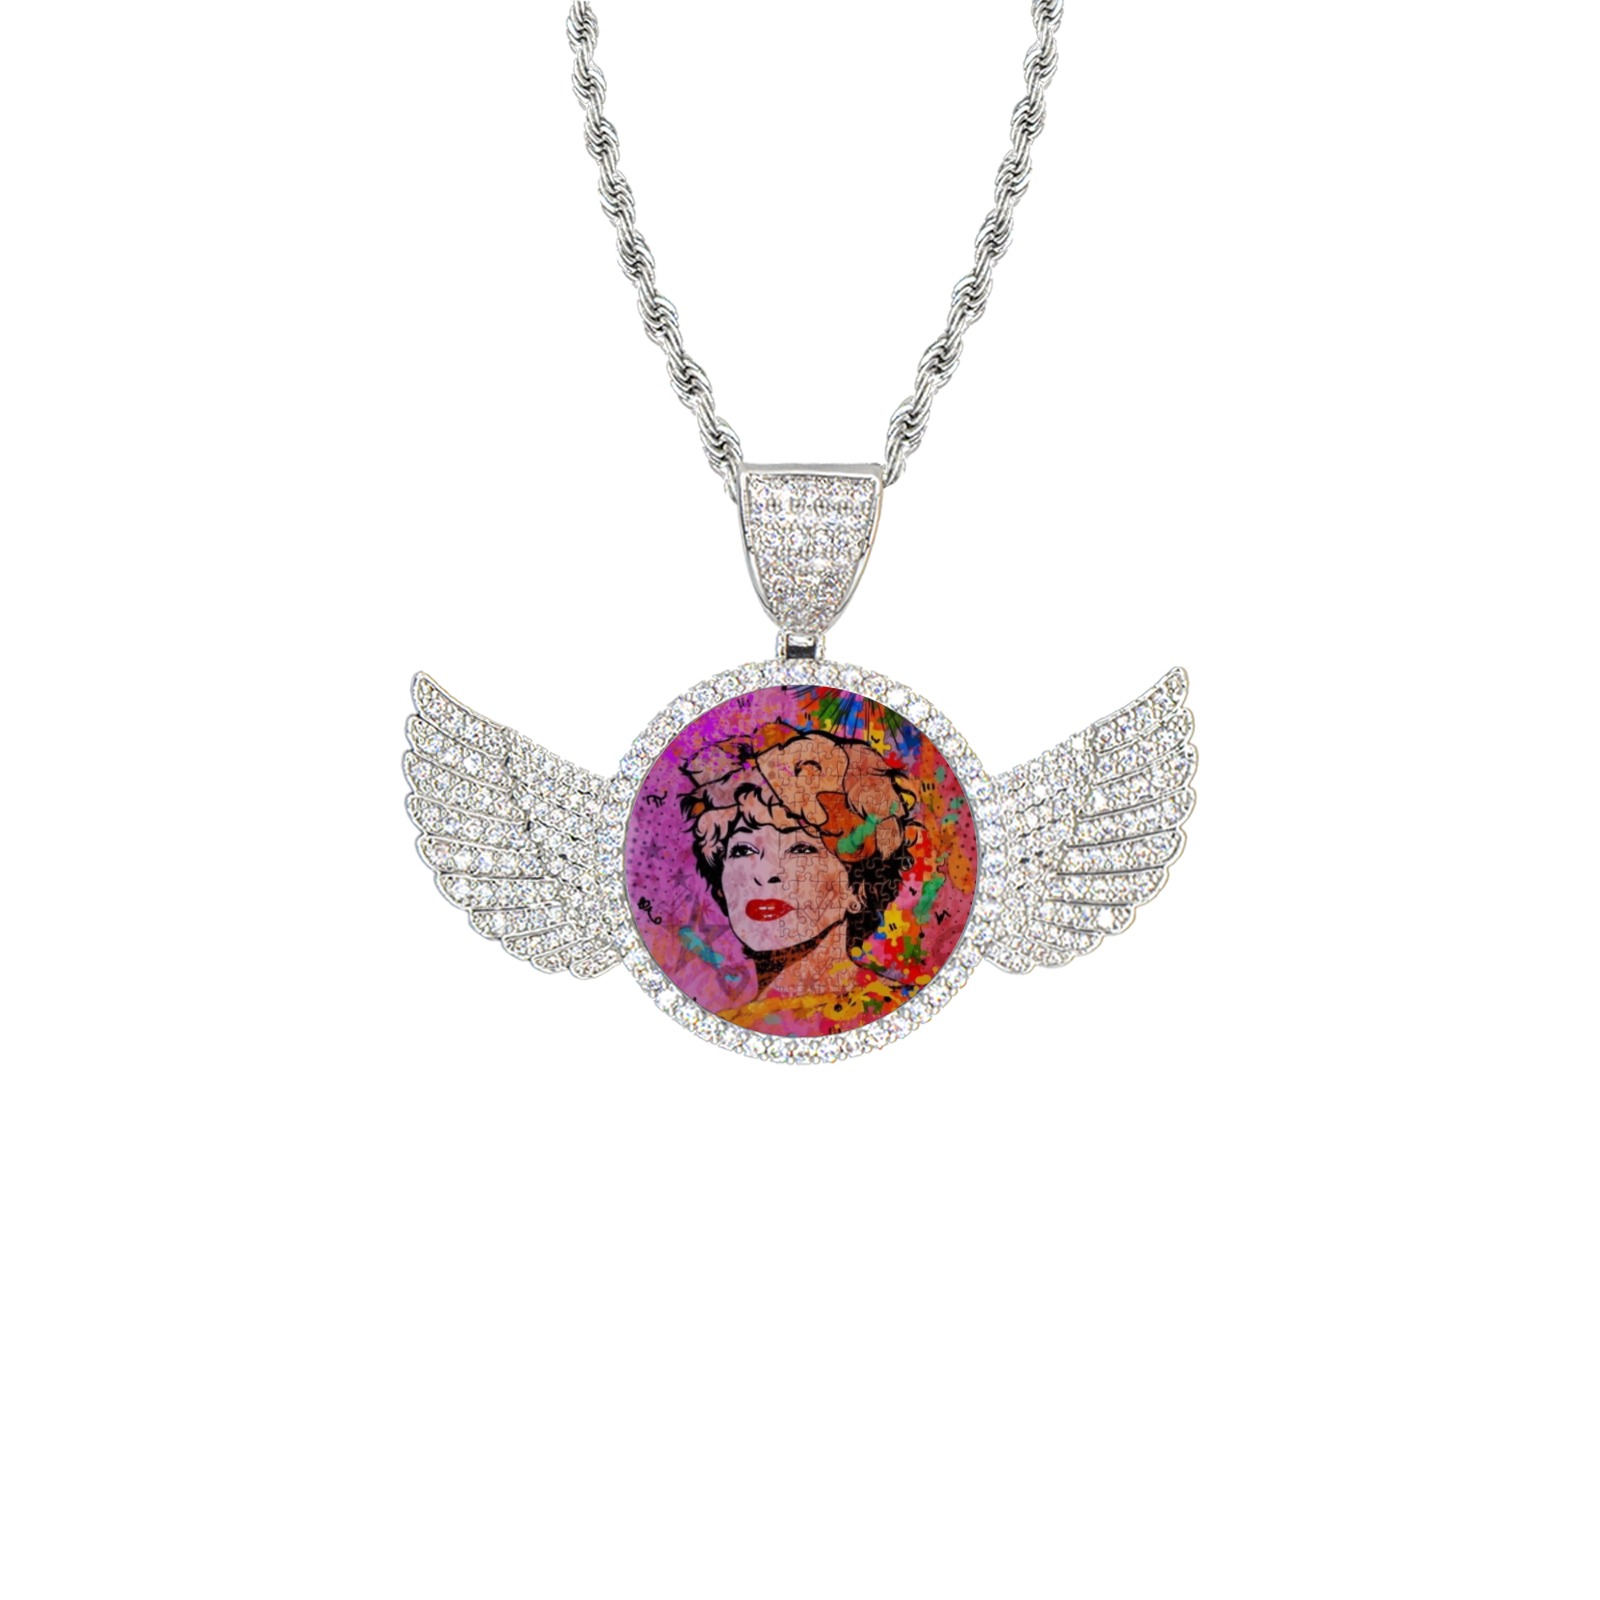 The Best by Nico Bielow Wings Silver Photo Pendant with Rope Chain